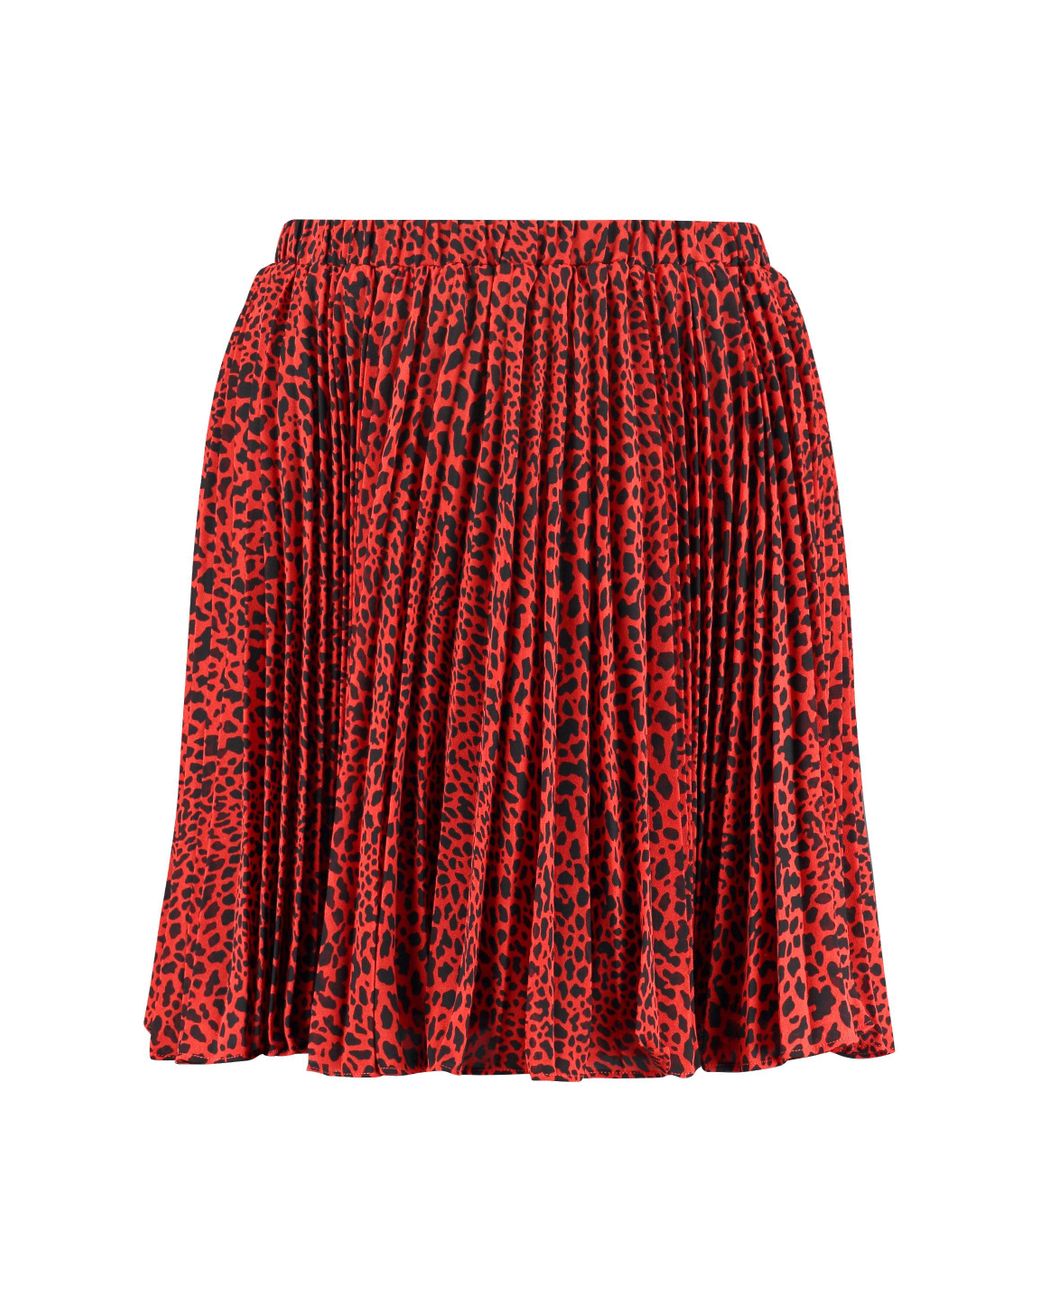 MICHAEL Michael Kors Synthetic Skirts in Red Save 18% Womens Skirts MICHAEL Michael Kors Skirts 